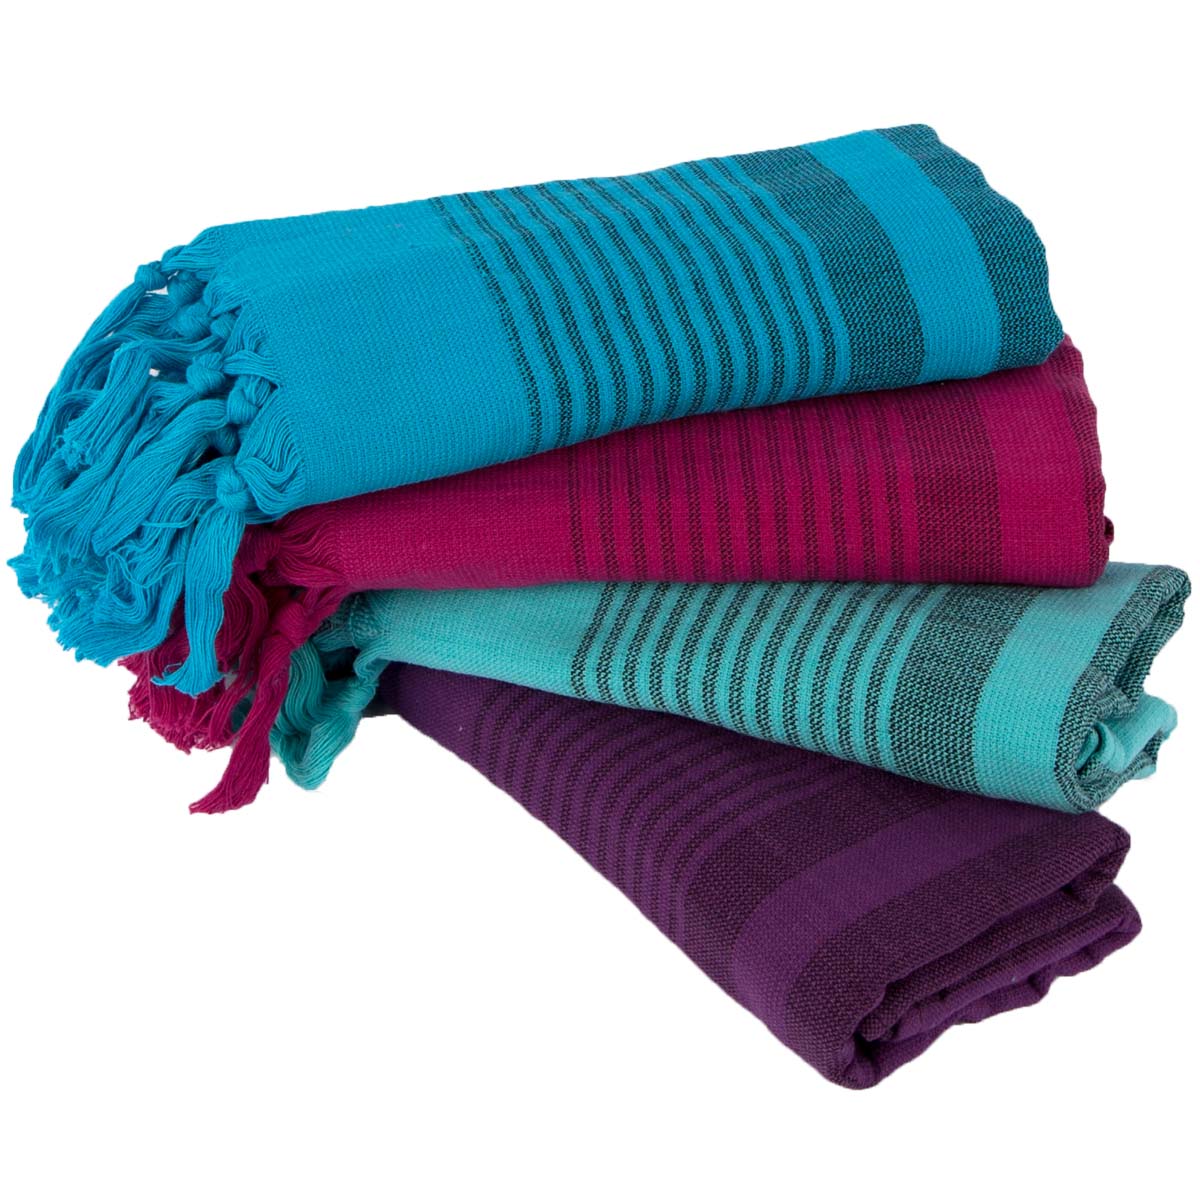 Turkish Home Hand Towel Set of 4, Variety Colors, 20 x 40 inches (Terry)